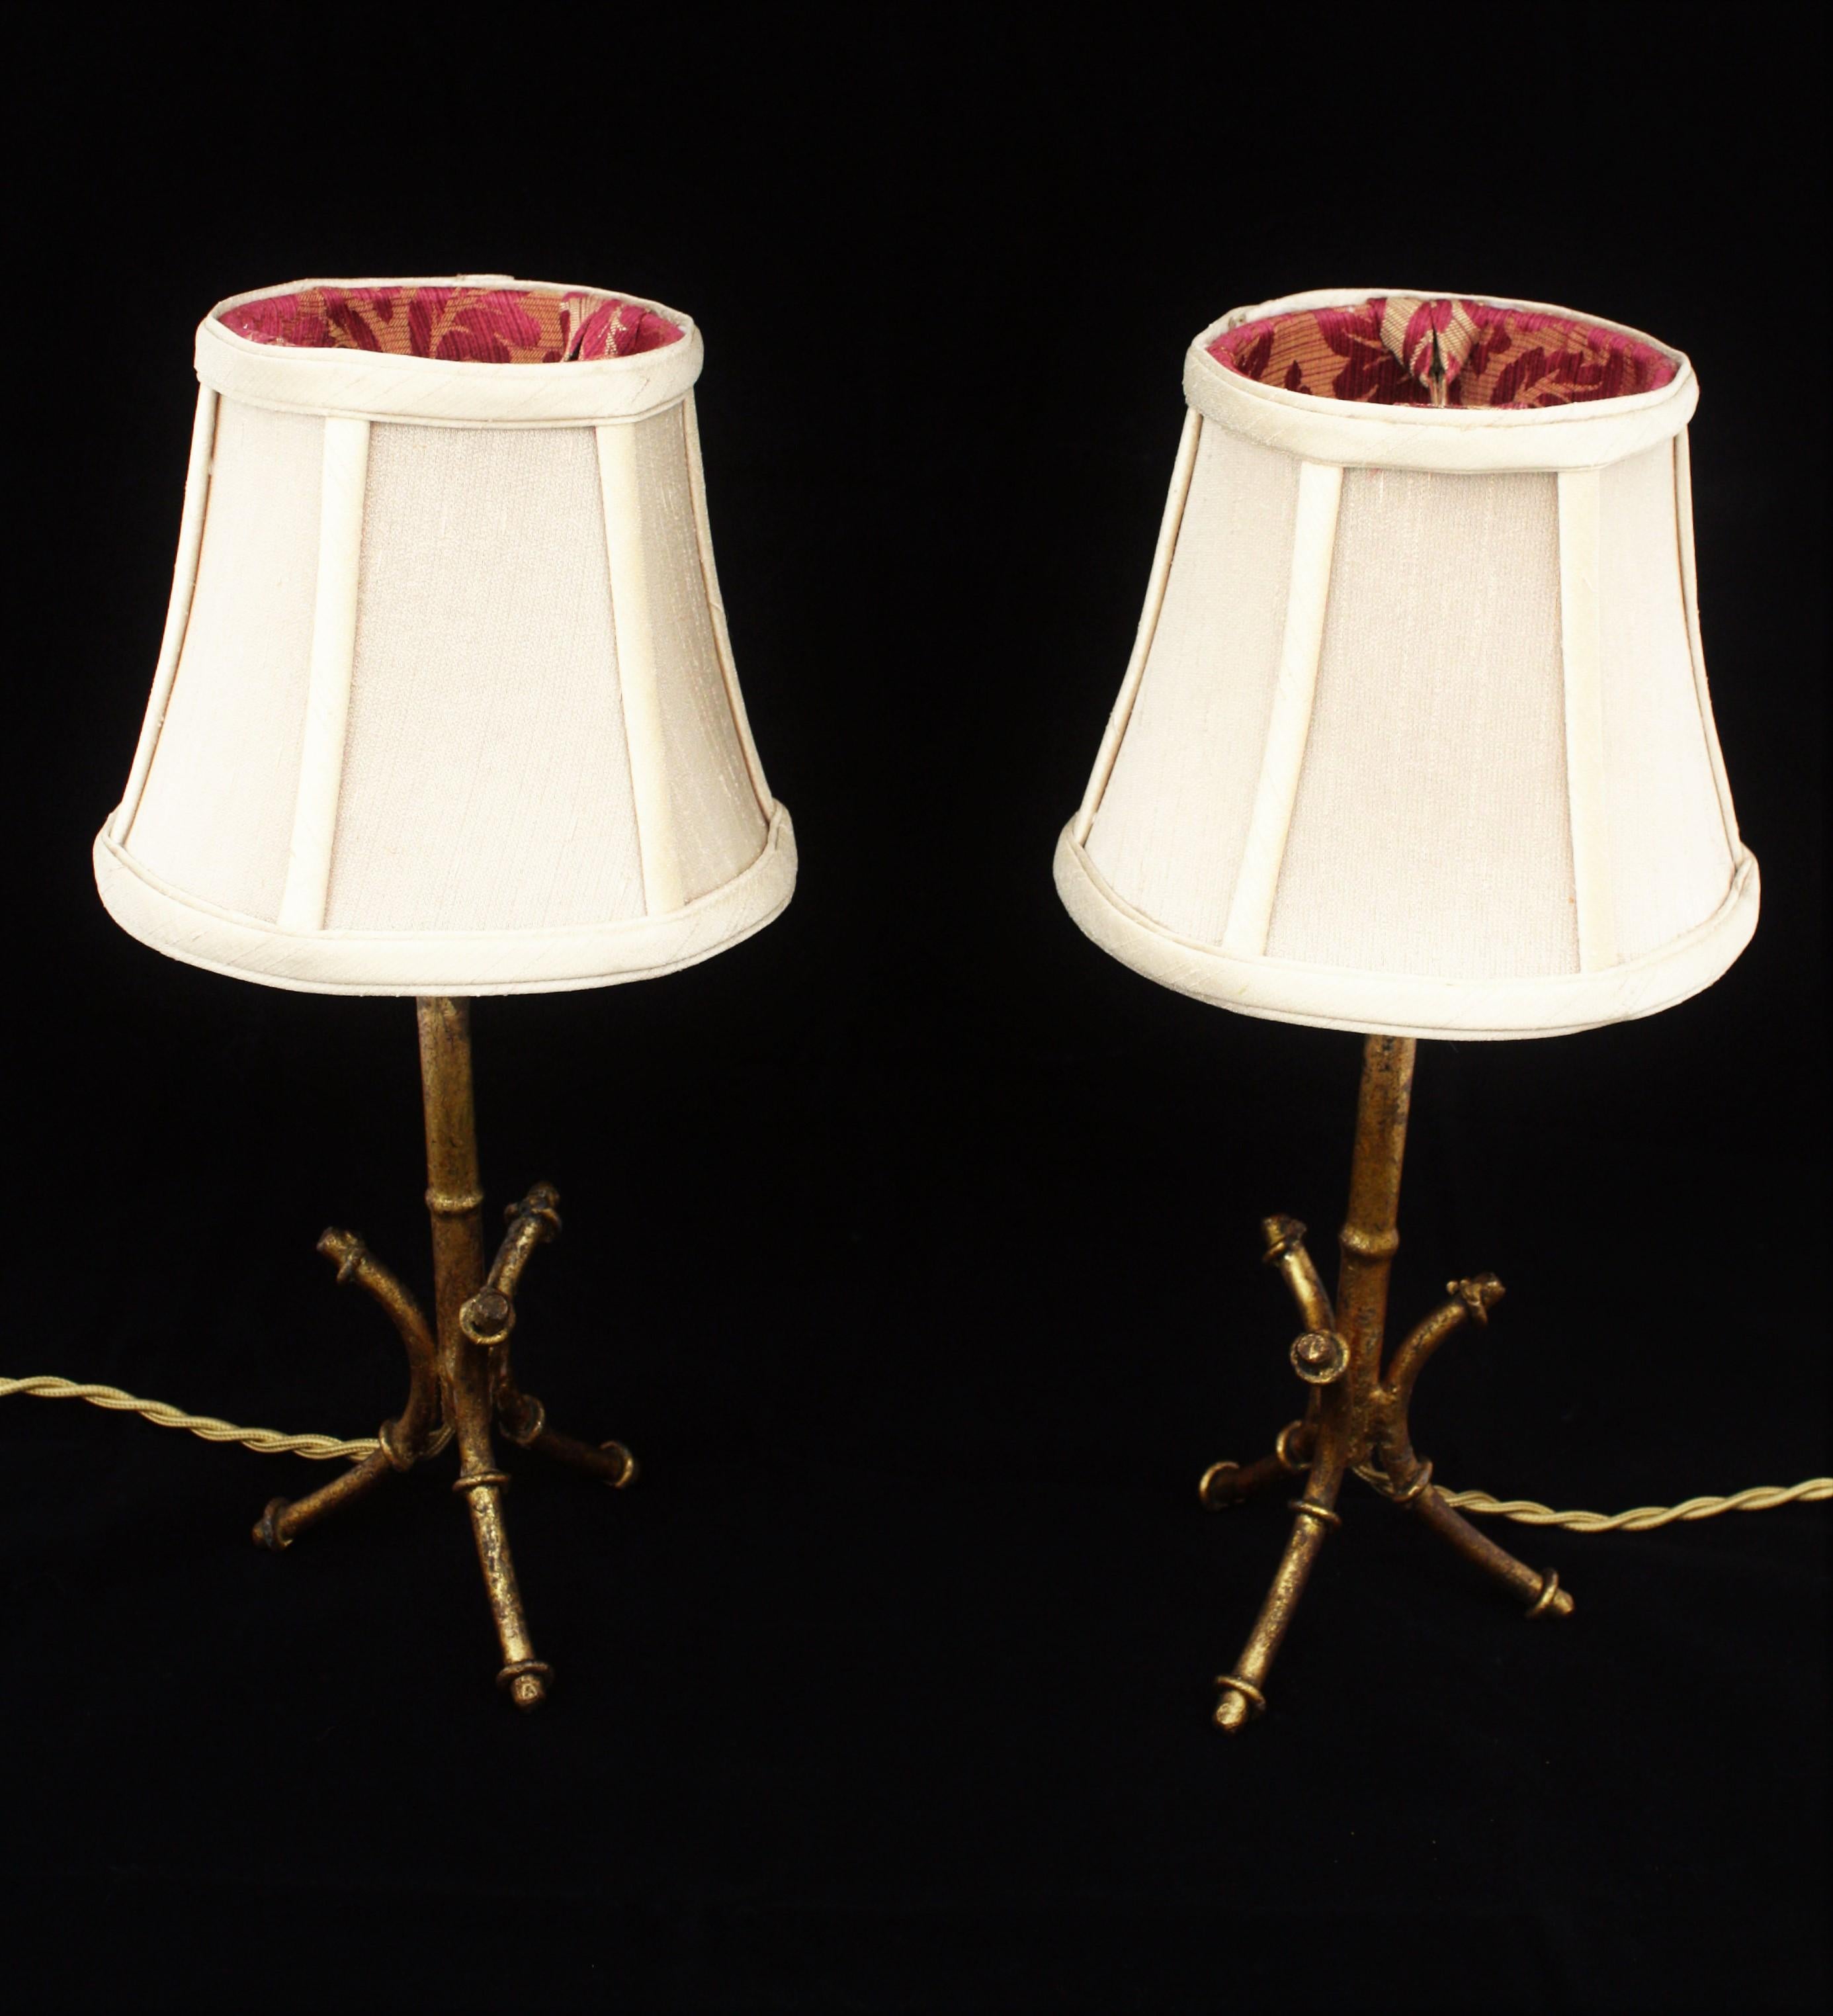 Pair of Faux Bamboo Gilt Iron Tripod Table Lamps, Maison Bagues Style For Sale 1